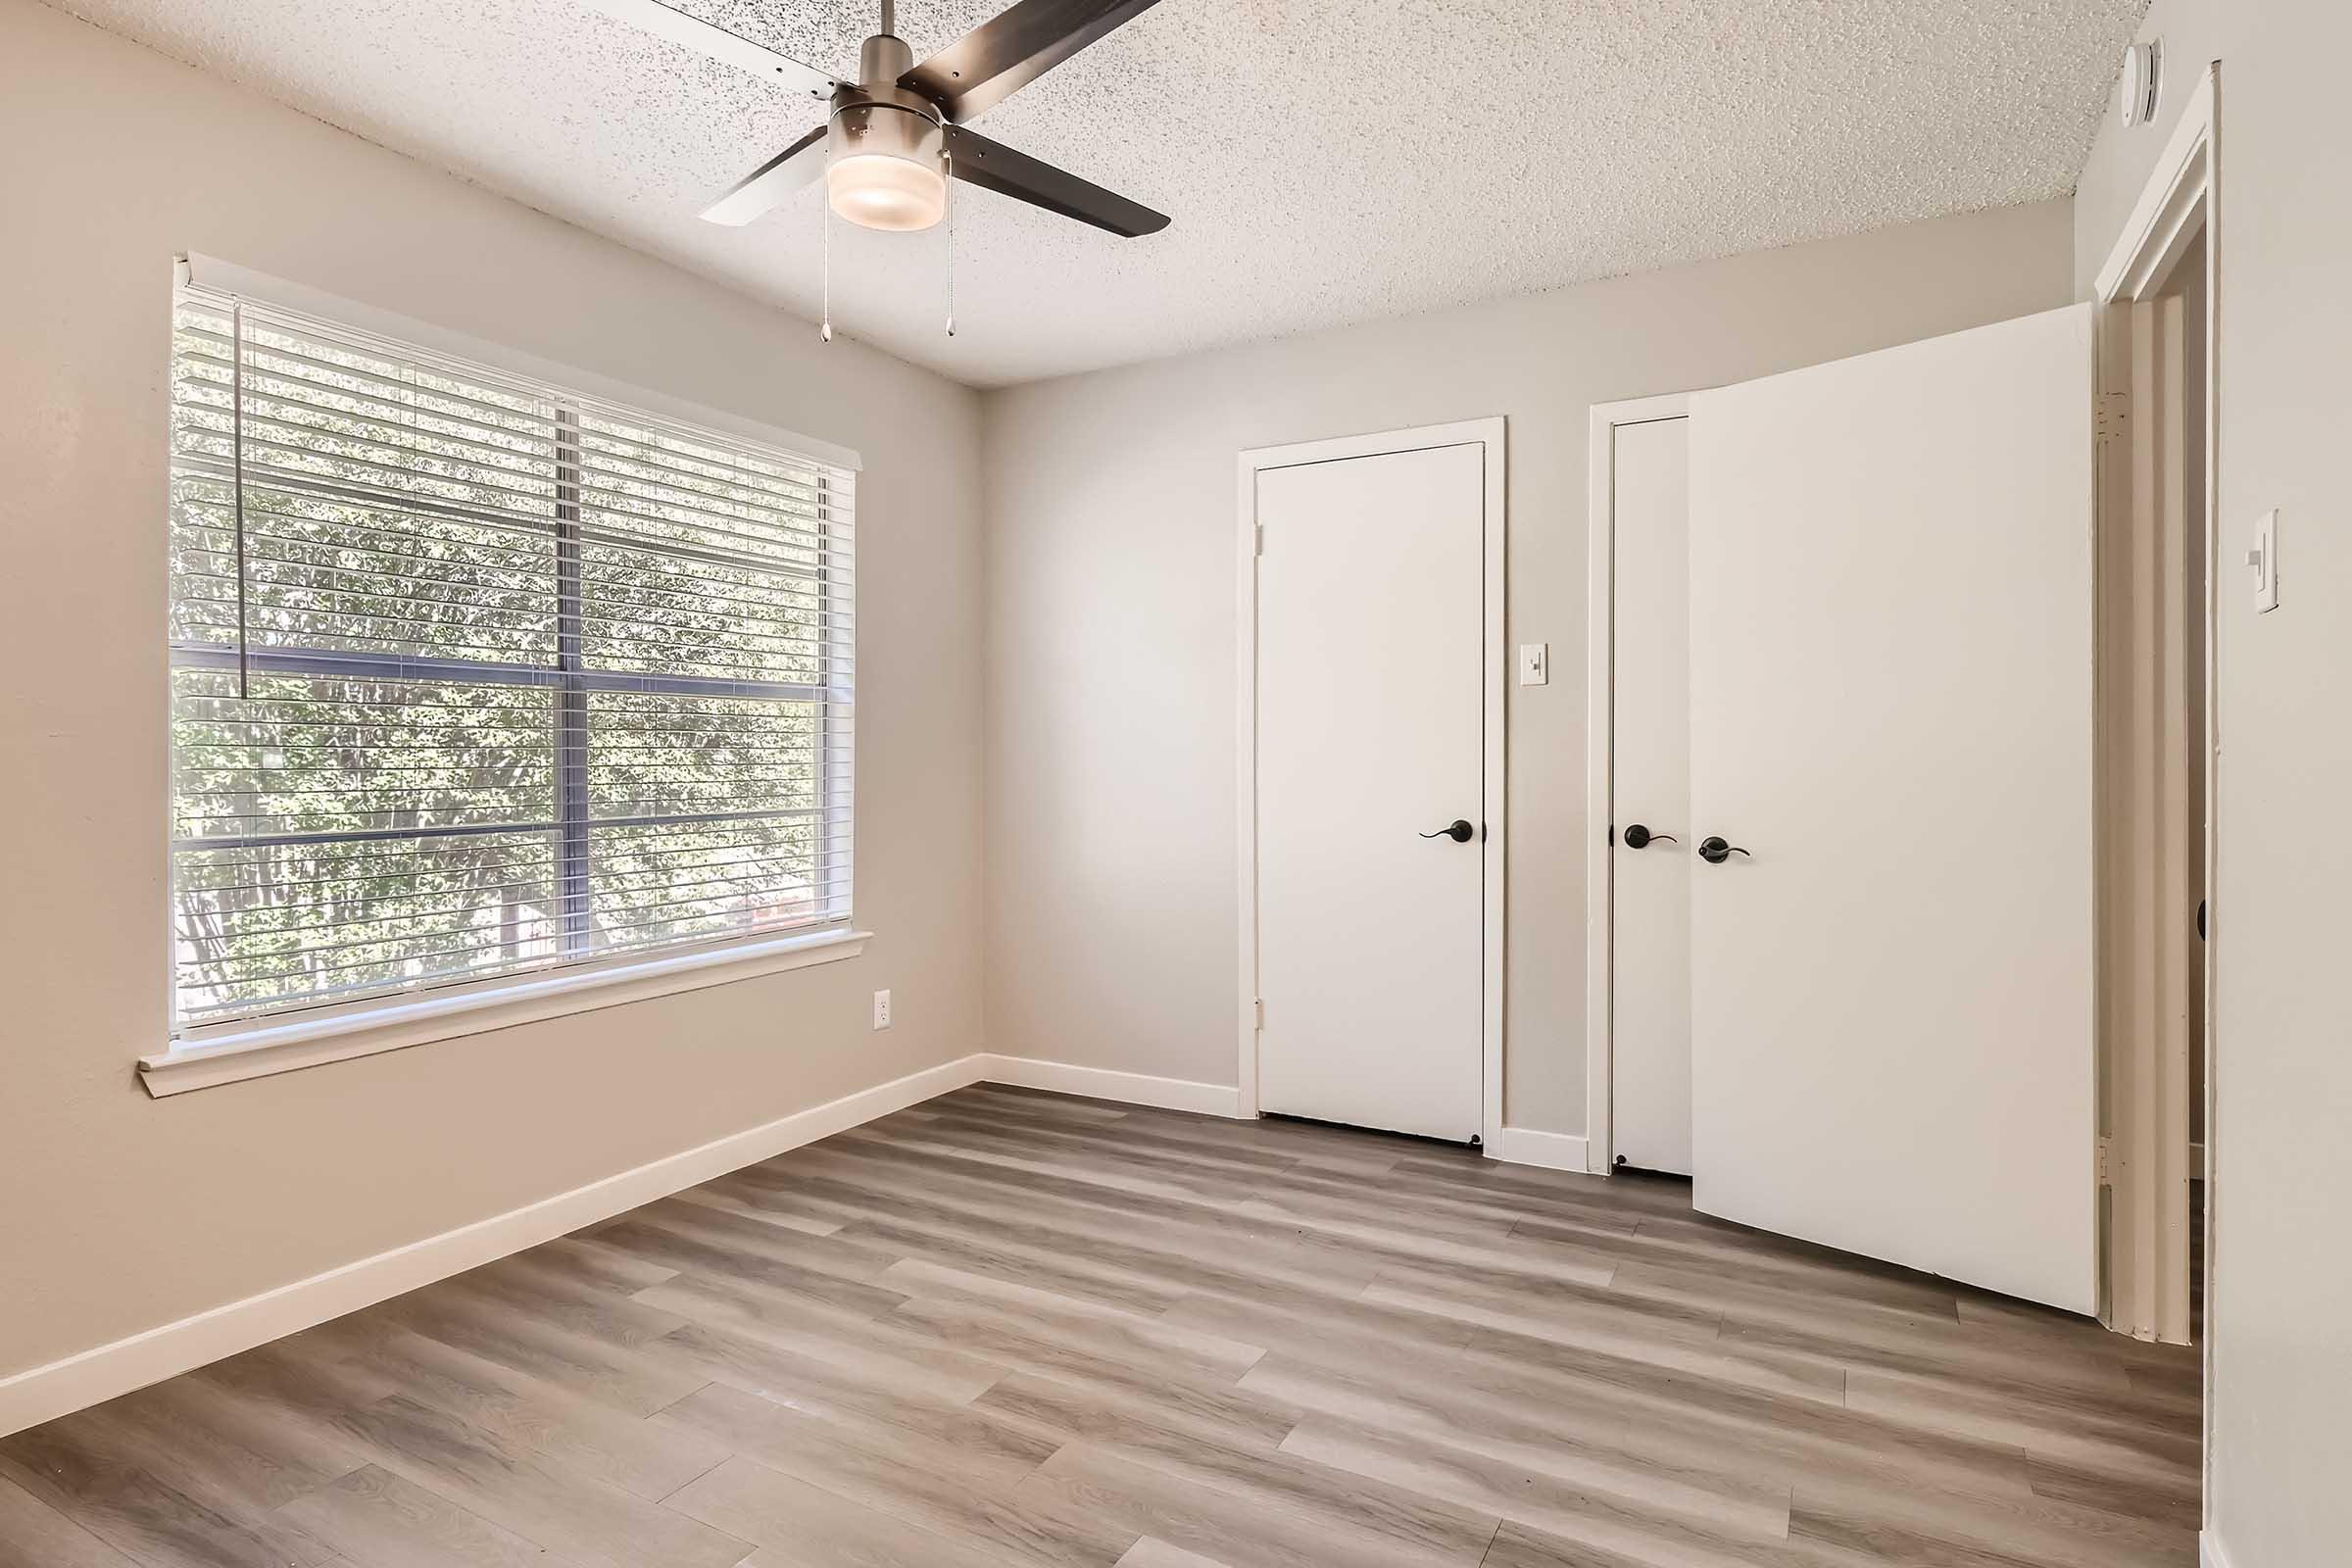 An apartment bedroom with wood-style flooring, a ceiling fan, and a window at Rise North Arlington.